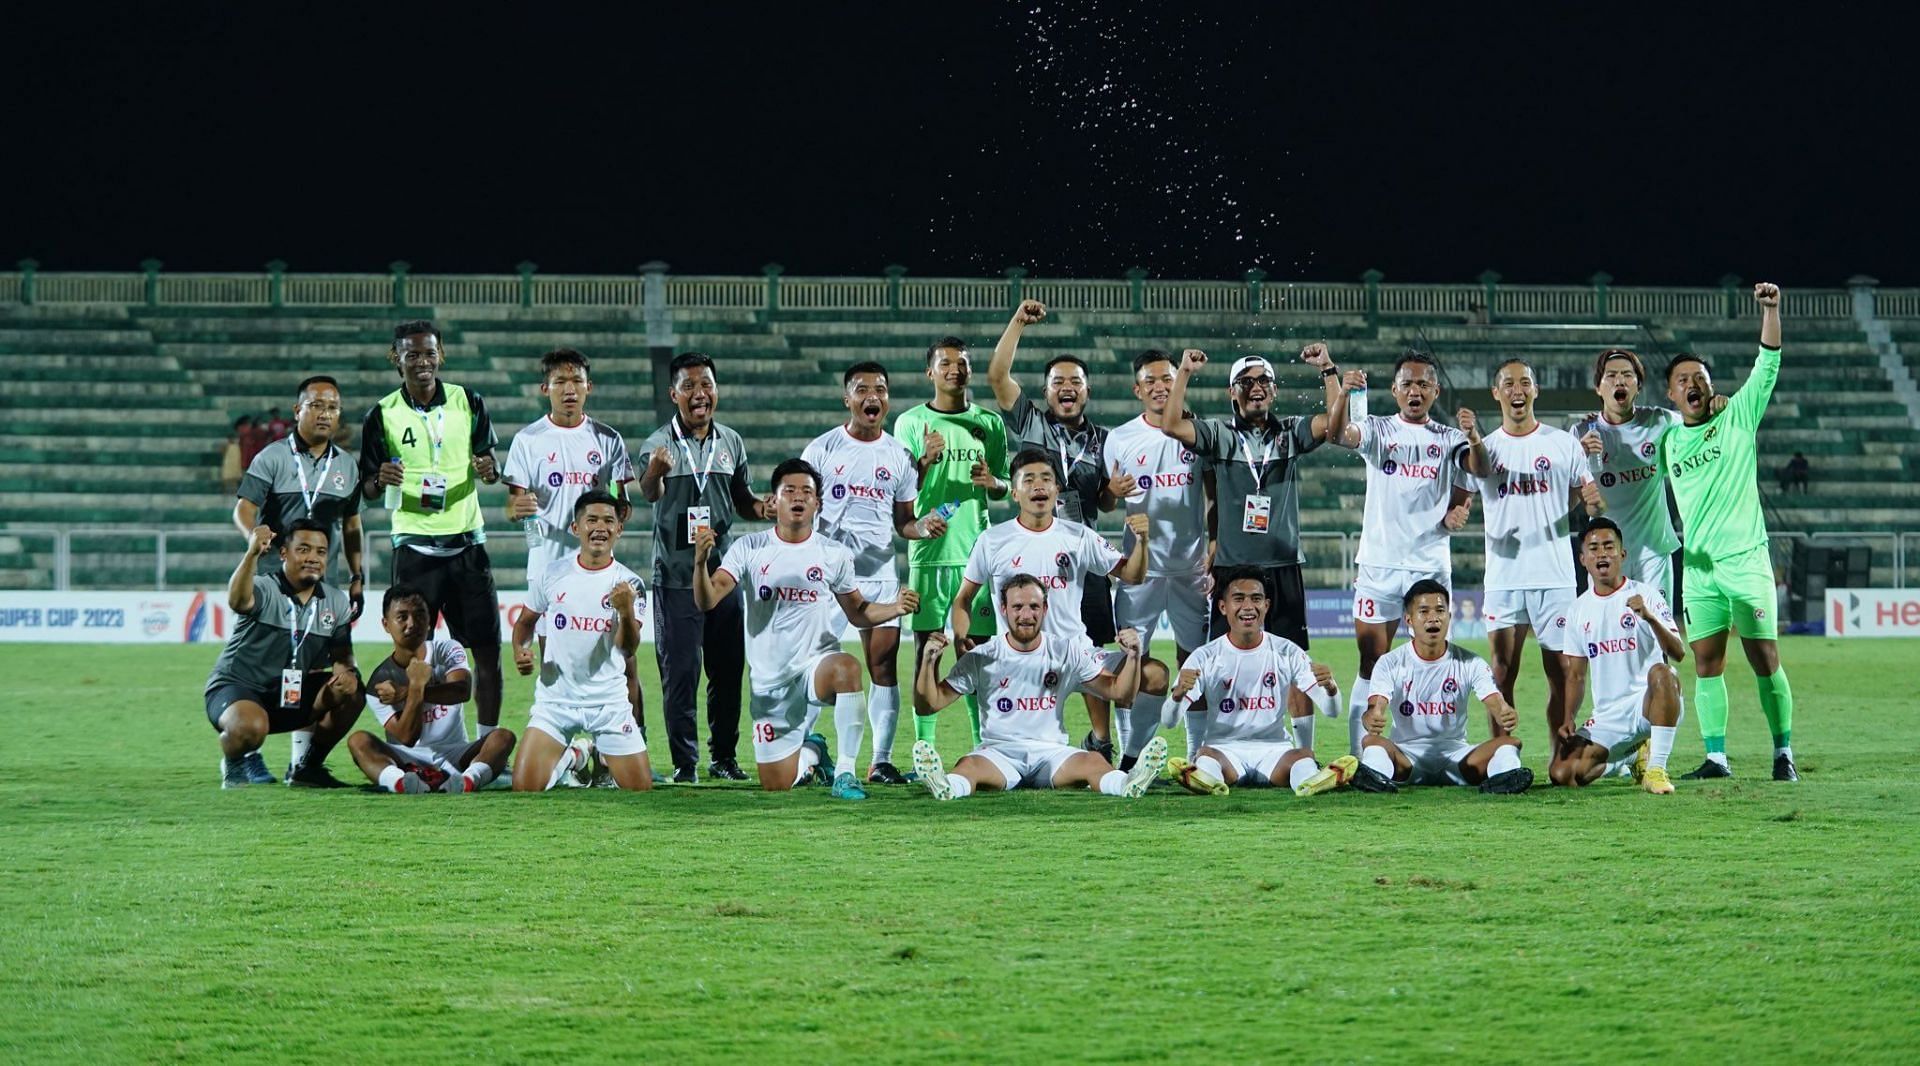 Aizawl FC players celebrating after their victory over TRAU FC.